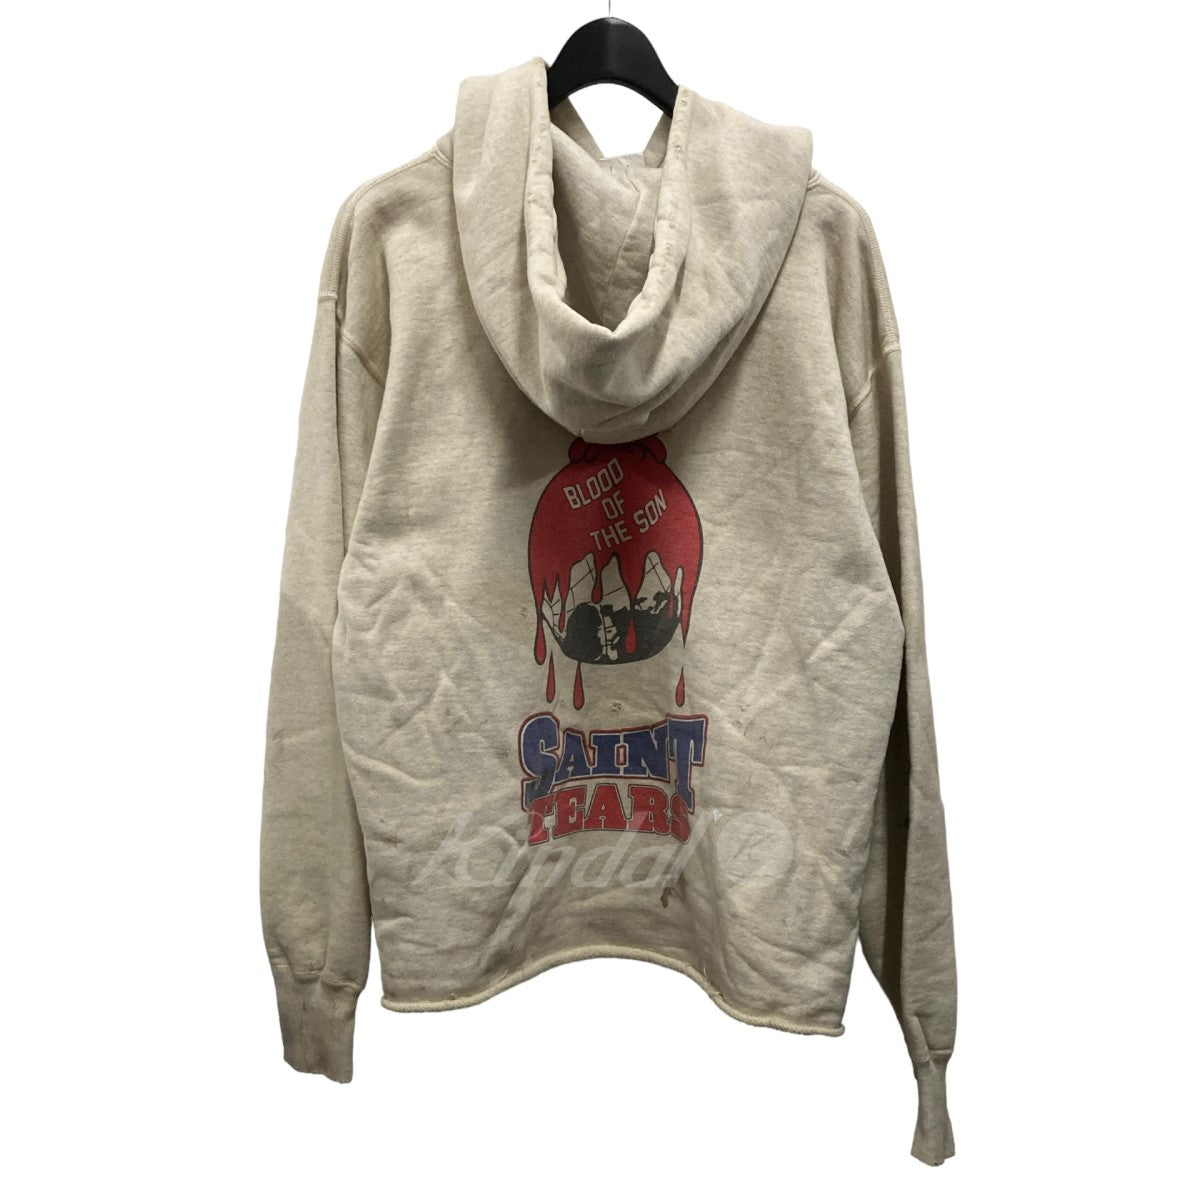 SAINT MICHAEL(セント マイケル) DT HOODIE／HOLY GIRL／GRAY 22AW SM 